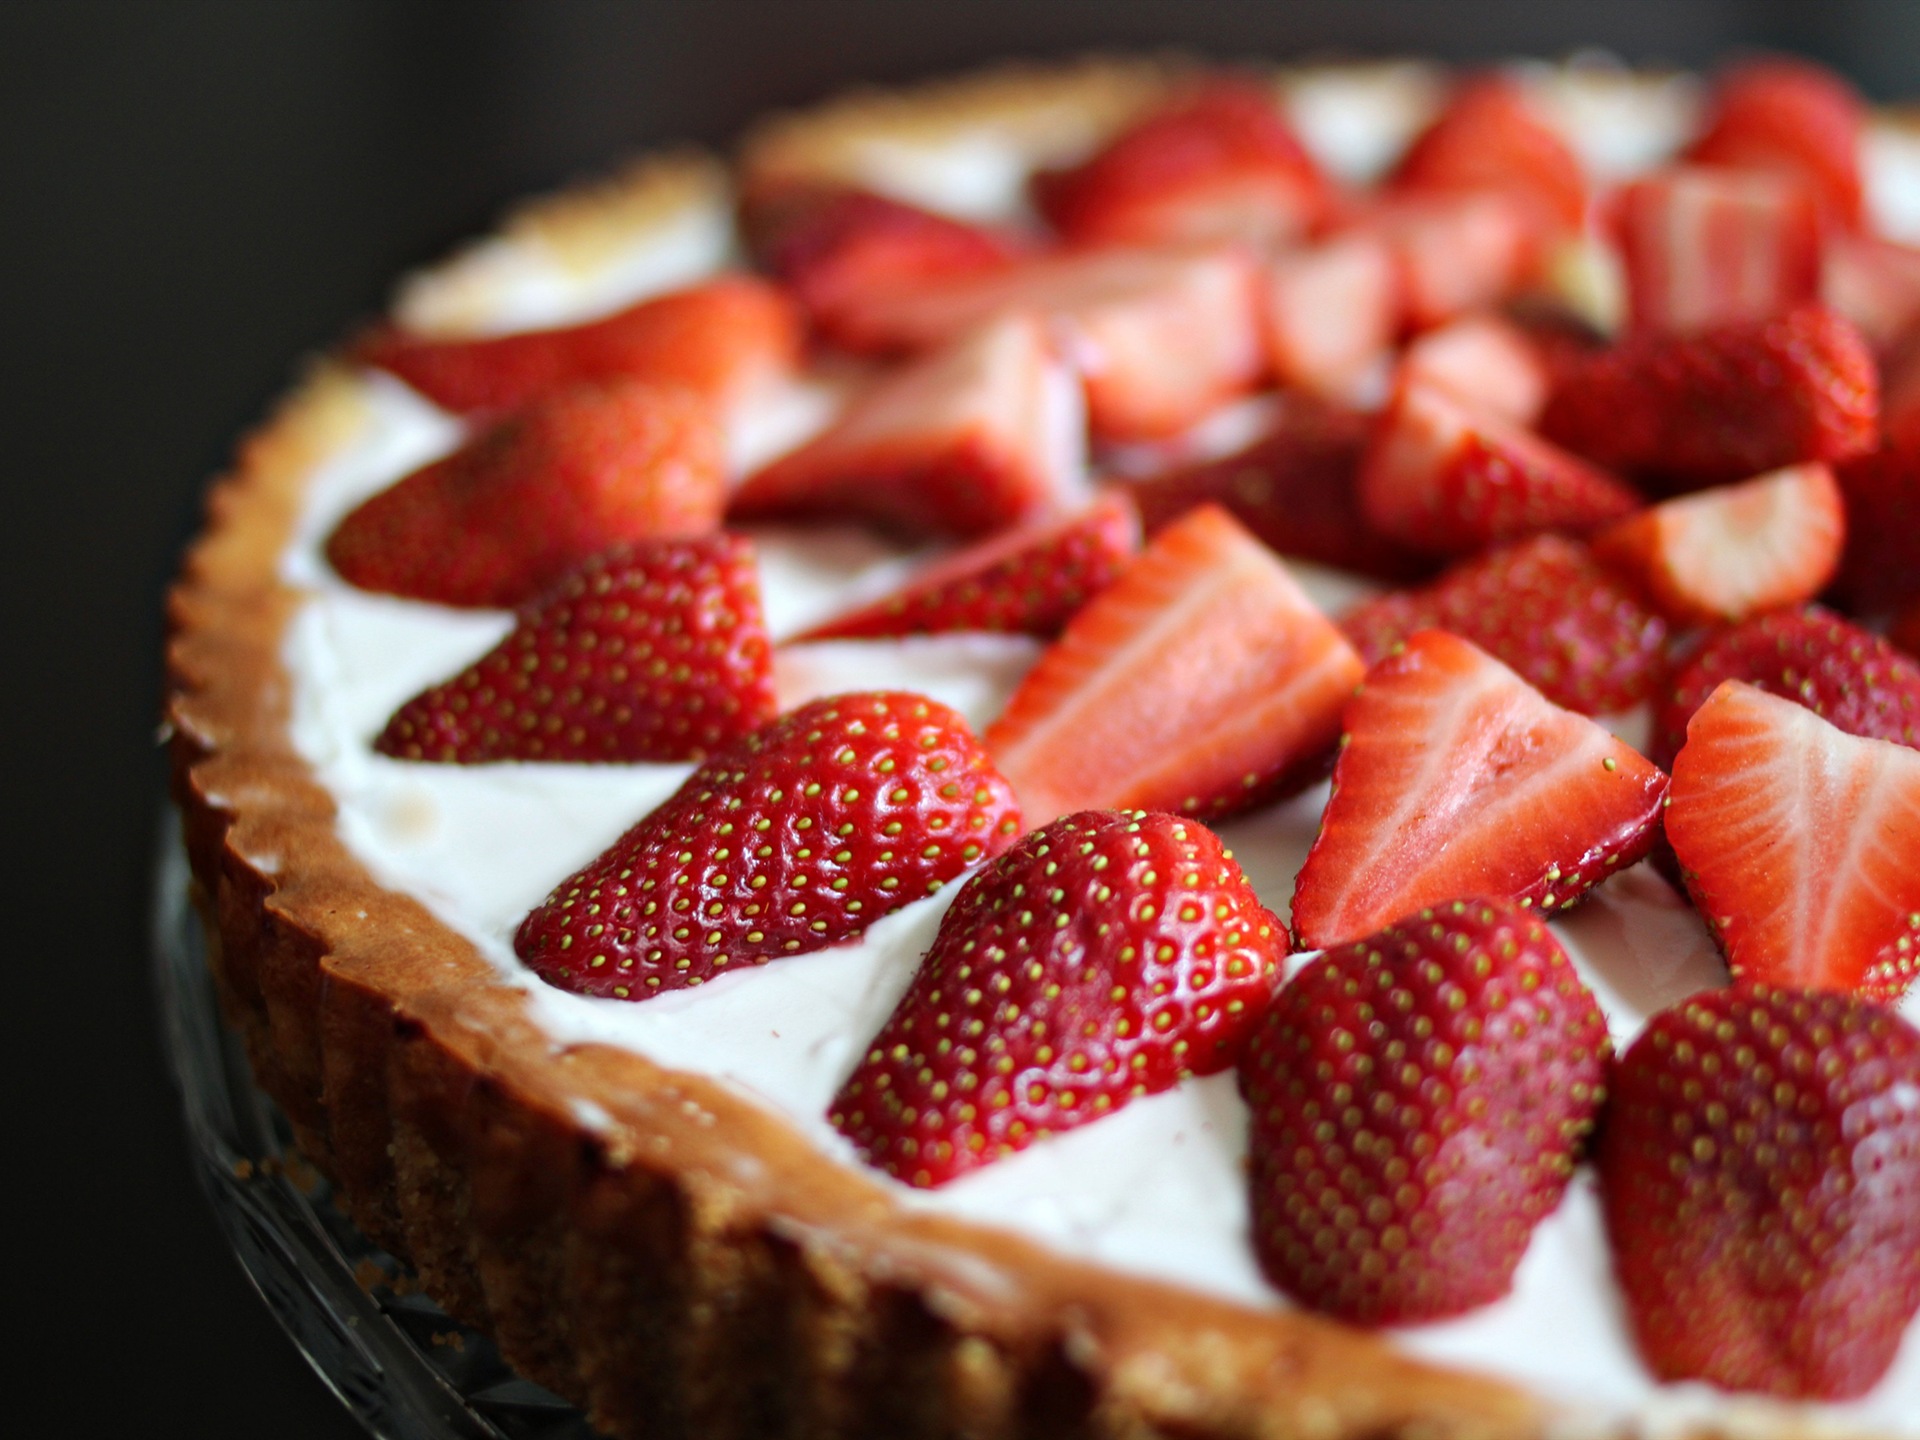 Delicious strawberry cake HD wallpapers #4 - 1920x1440